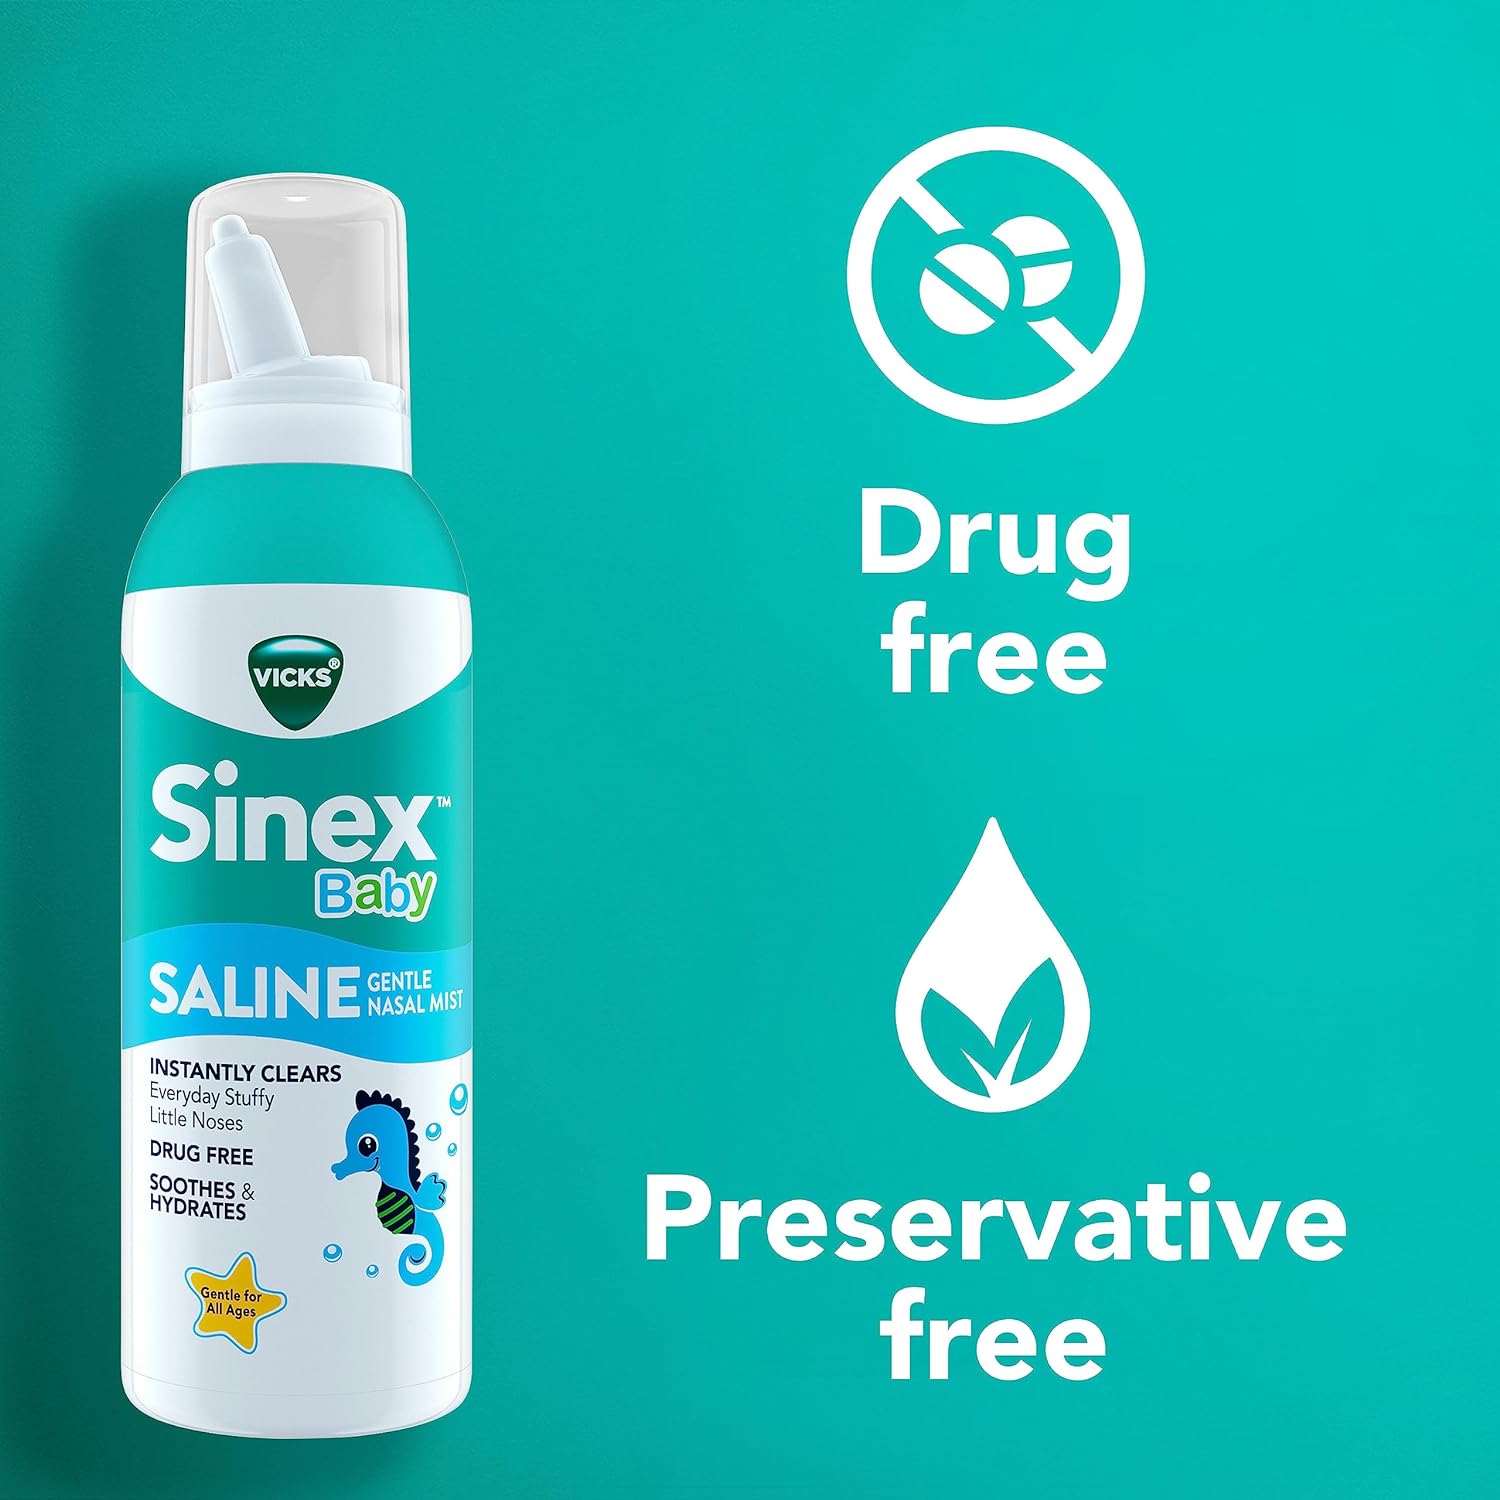 VICKS Sinex Baby Saline Nasal Spray, Drug Free Gentle Nasal Mist, Instantly Clears Everyday Stuffy Little Noses, Soothes & Hydrates, Safe For Daily Use, Gentle For All Ages, 5 OZ x 2 : Health & Household